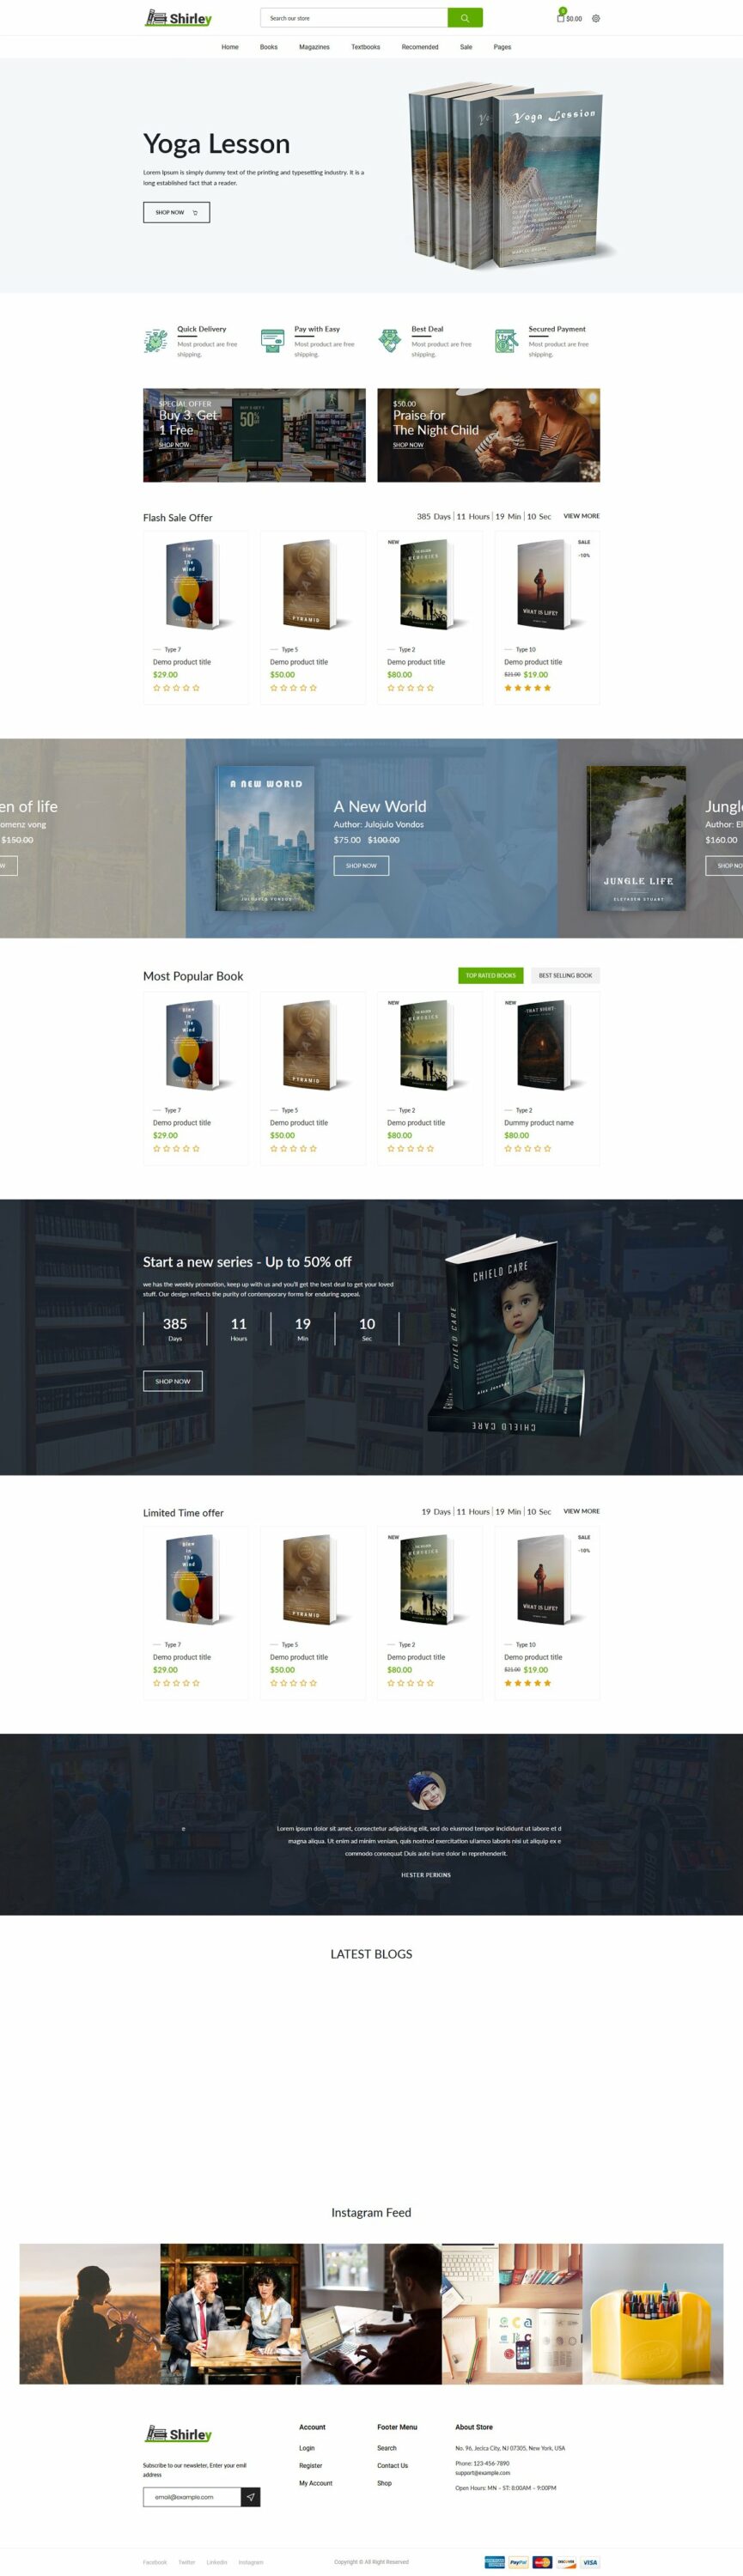 Image of Bookstore Templates.